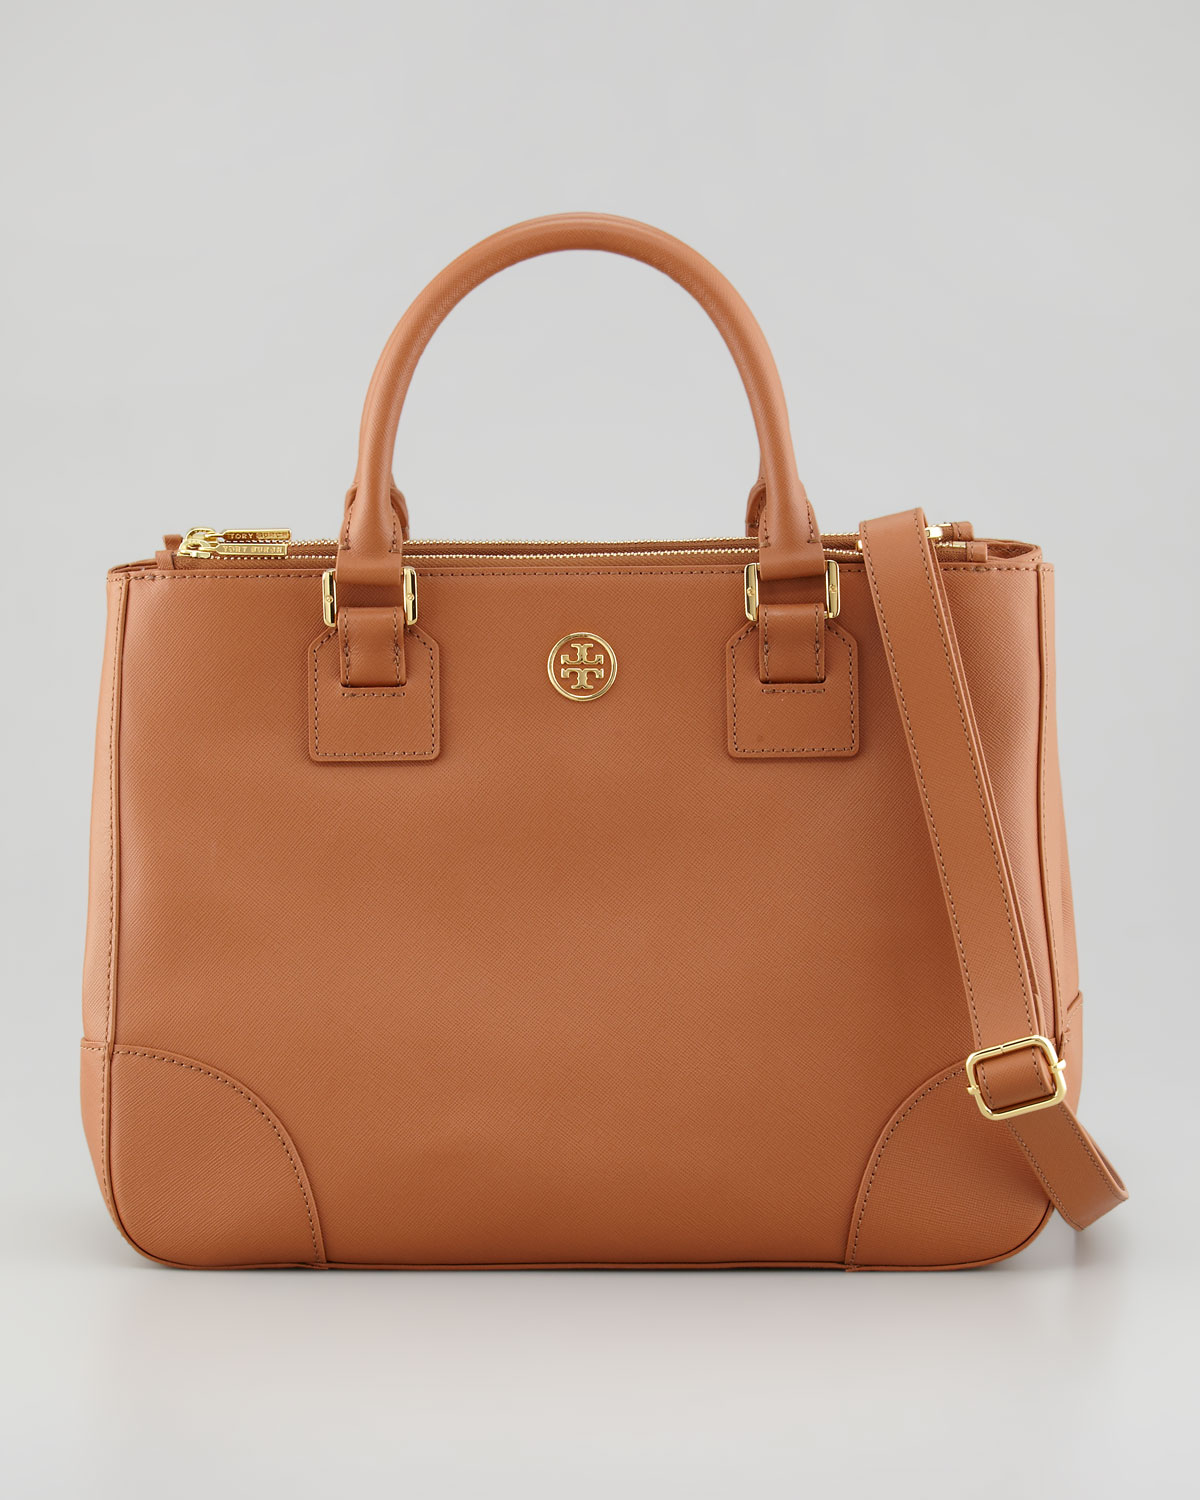 Lyst - Tory burch Robinson Doublezip Tote Bag in Brown